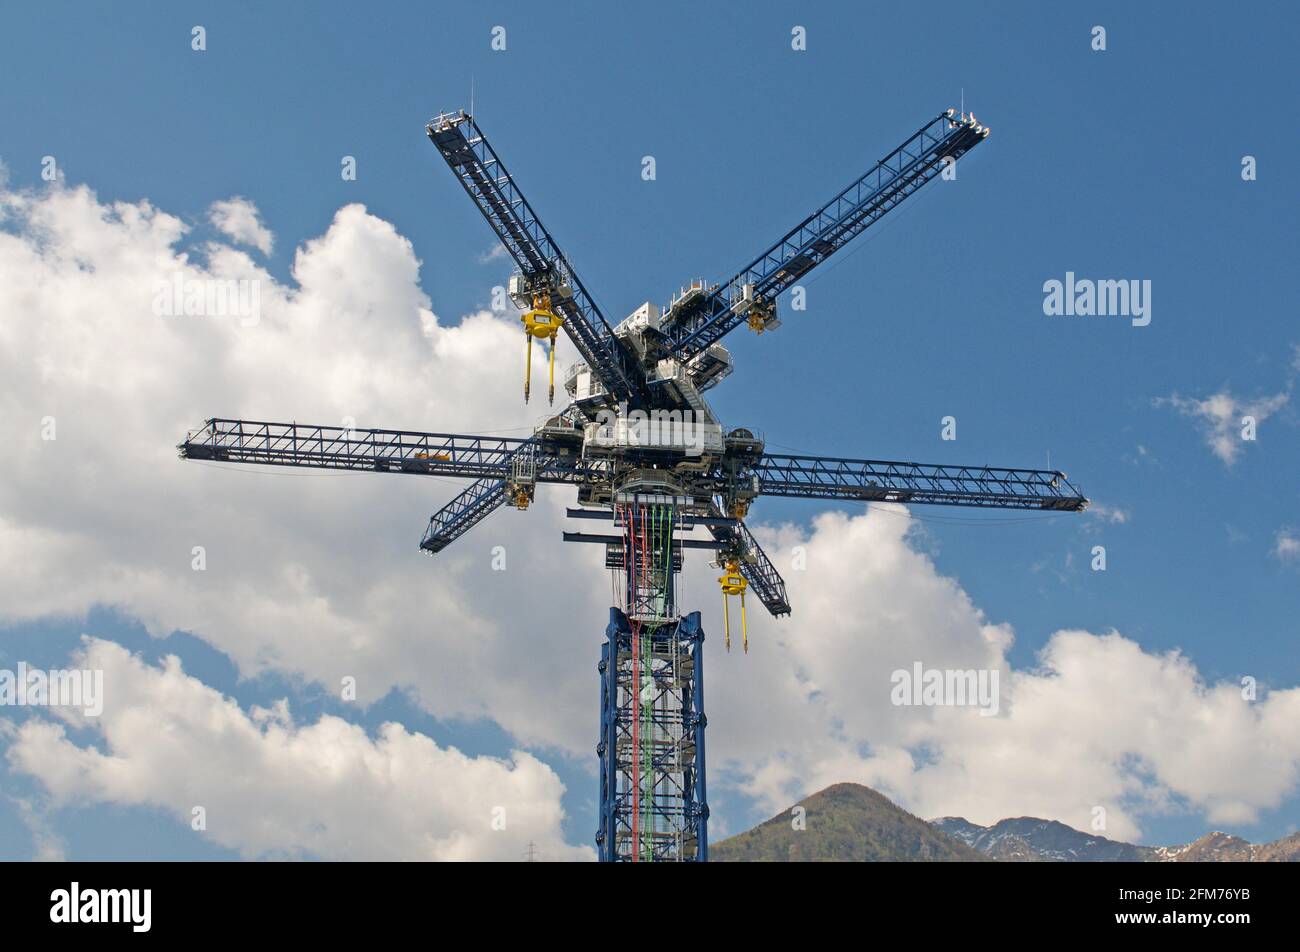 Castione, Switzerland - 26th April 2021 : View of the Energy Vault crane tower in Switzerland. Energy Vault is a company specializing in gravity and k Stock Photo